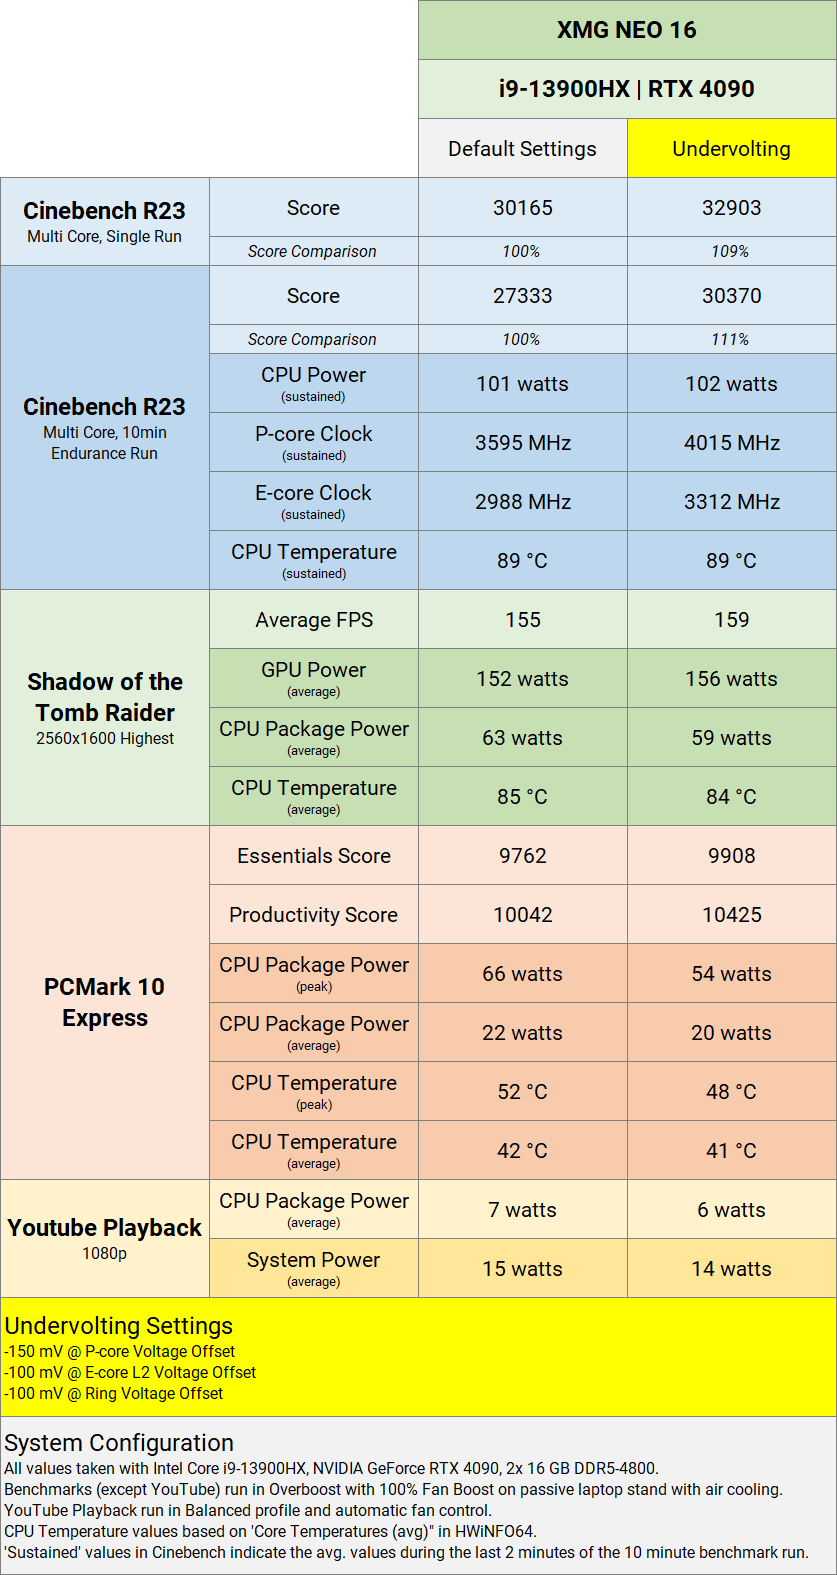 xmg neo e23 undervolting benchmark table